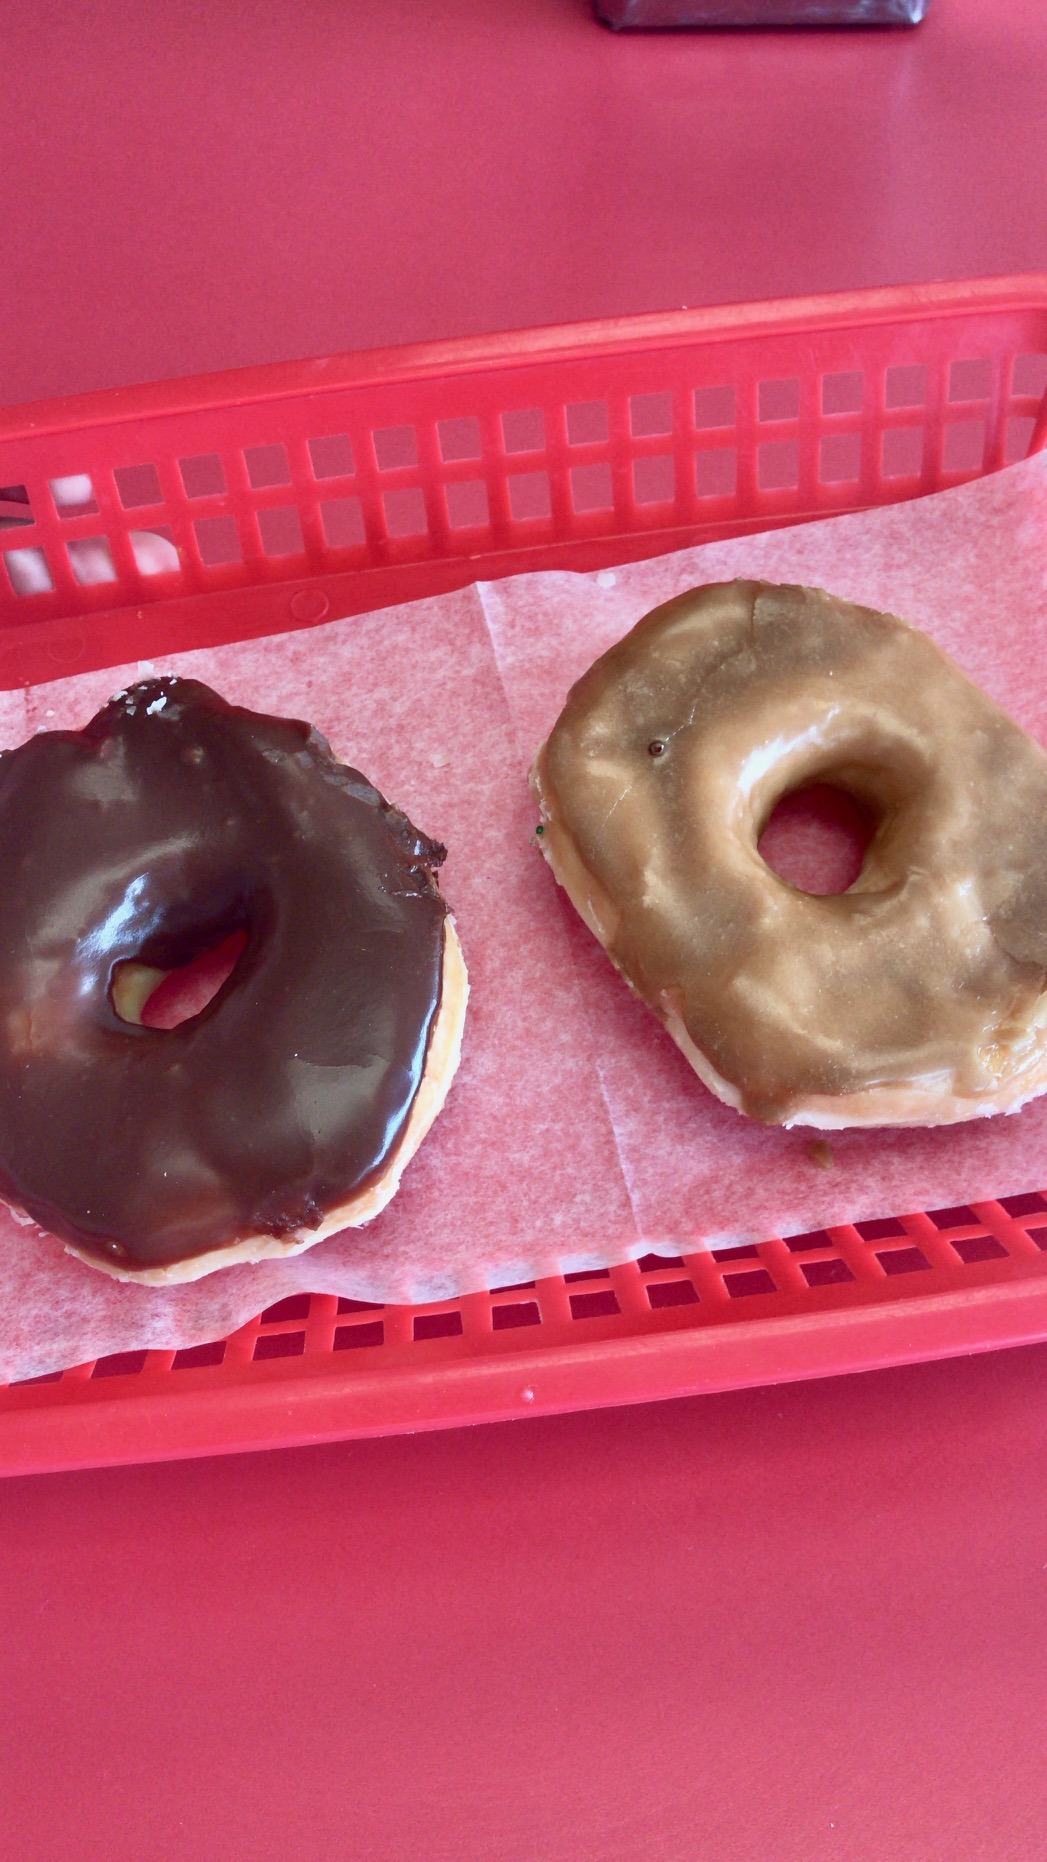 These are the best donuts at Max's Donut shop in Allen Texas